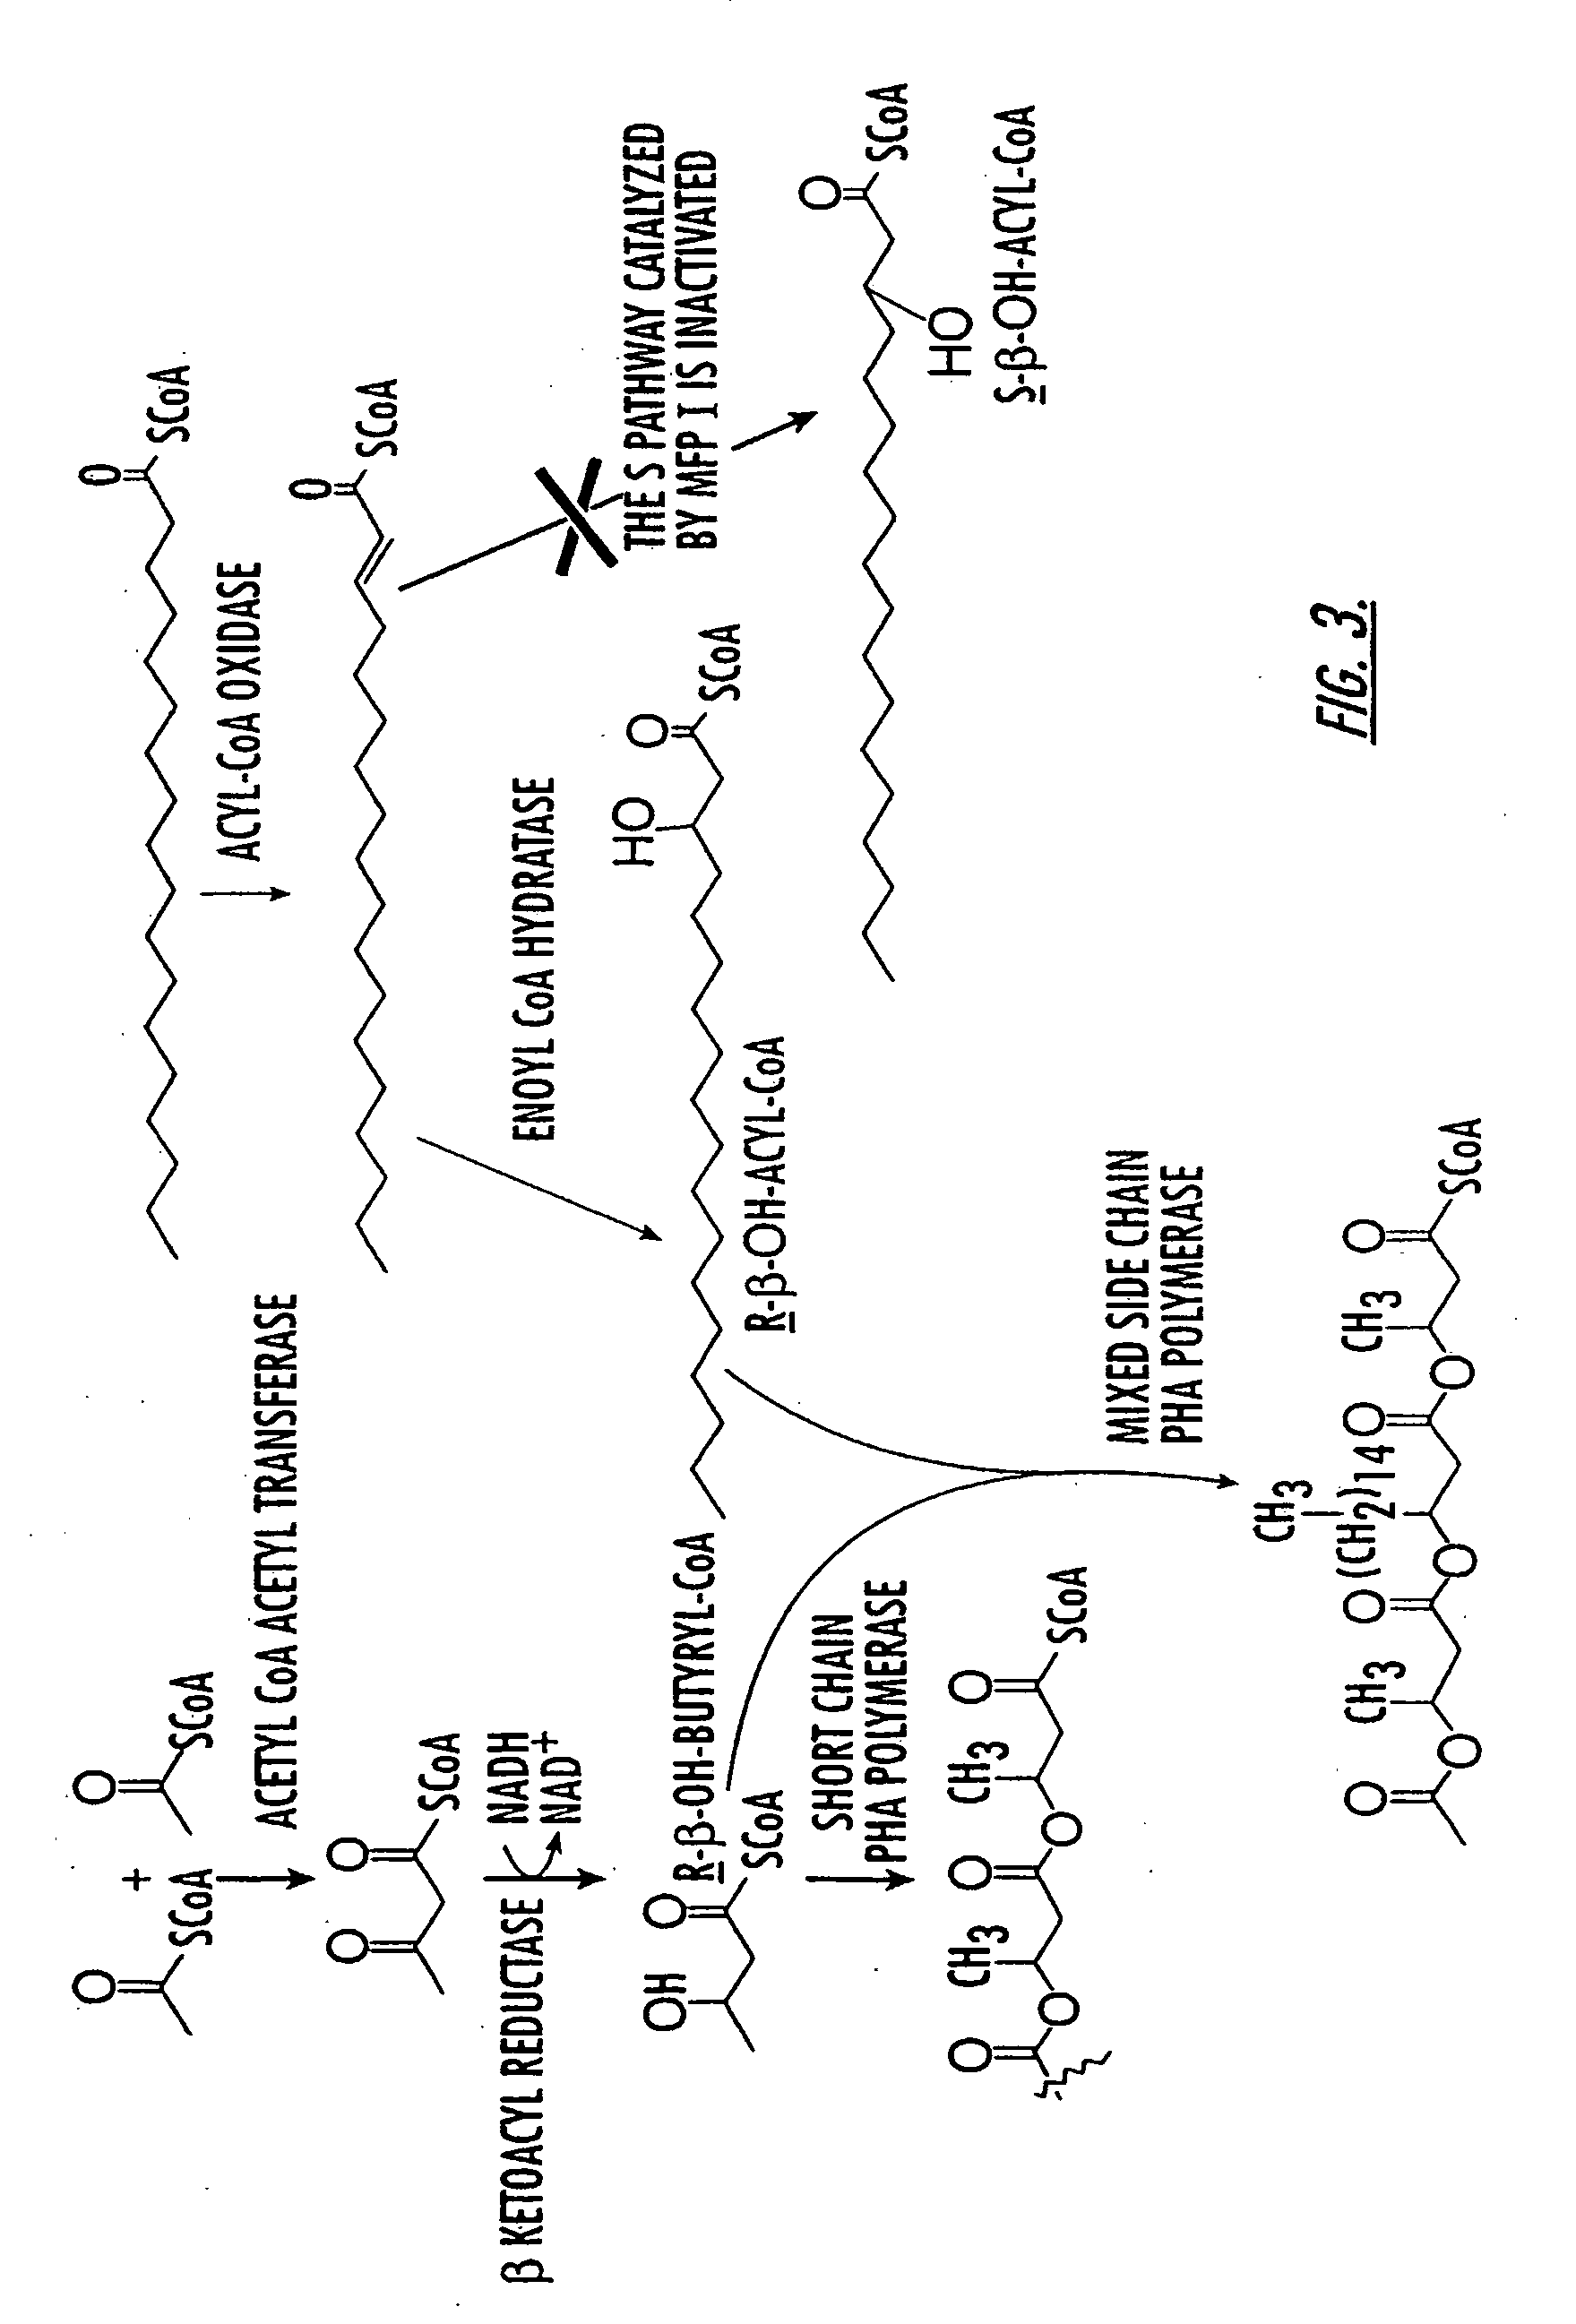 Production of polyhydroxyalkanoate in plants